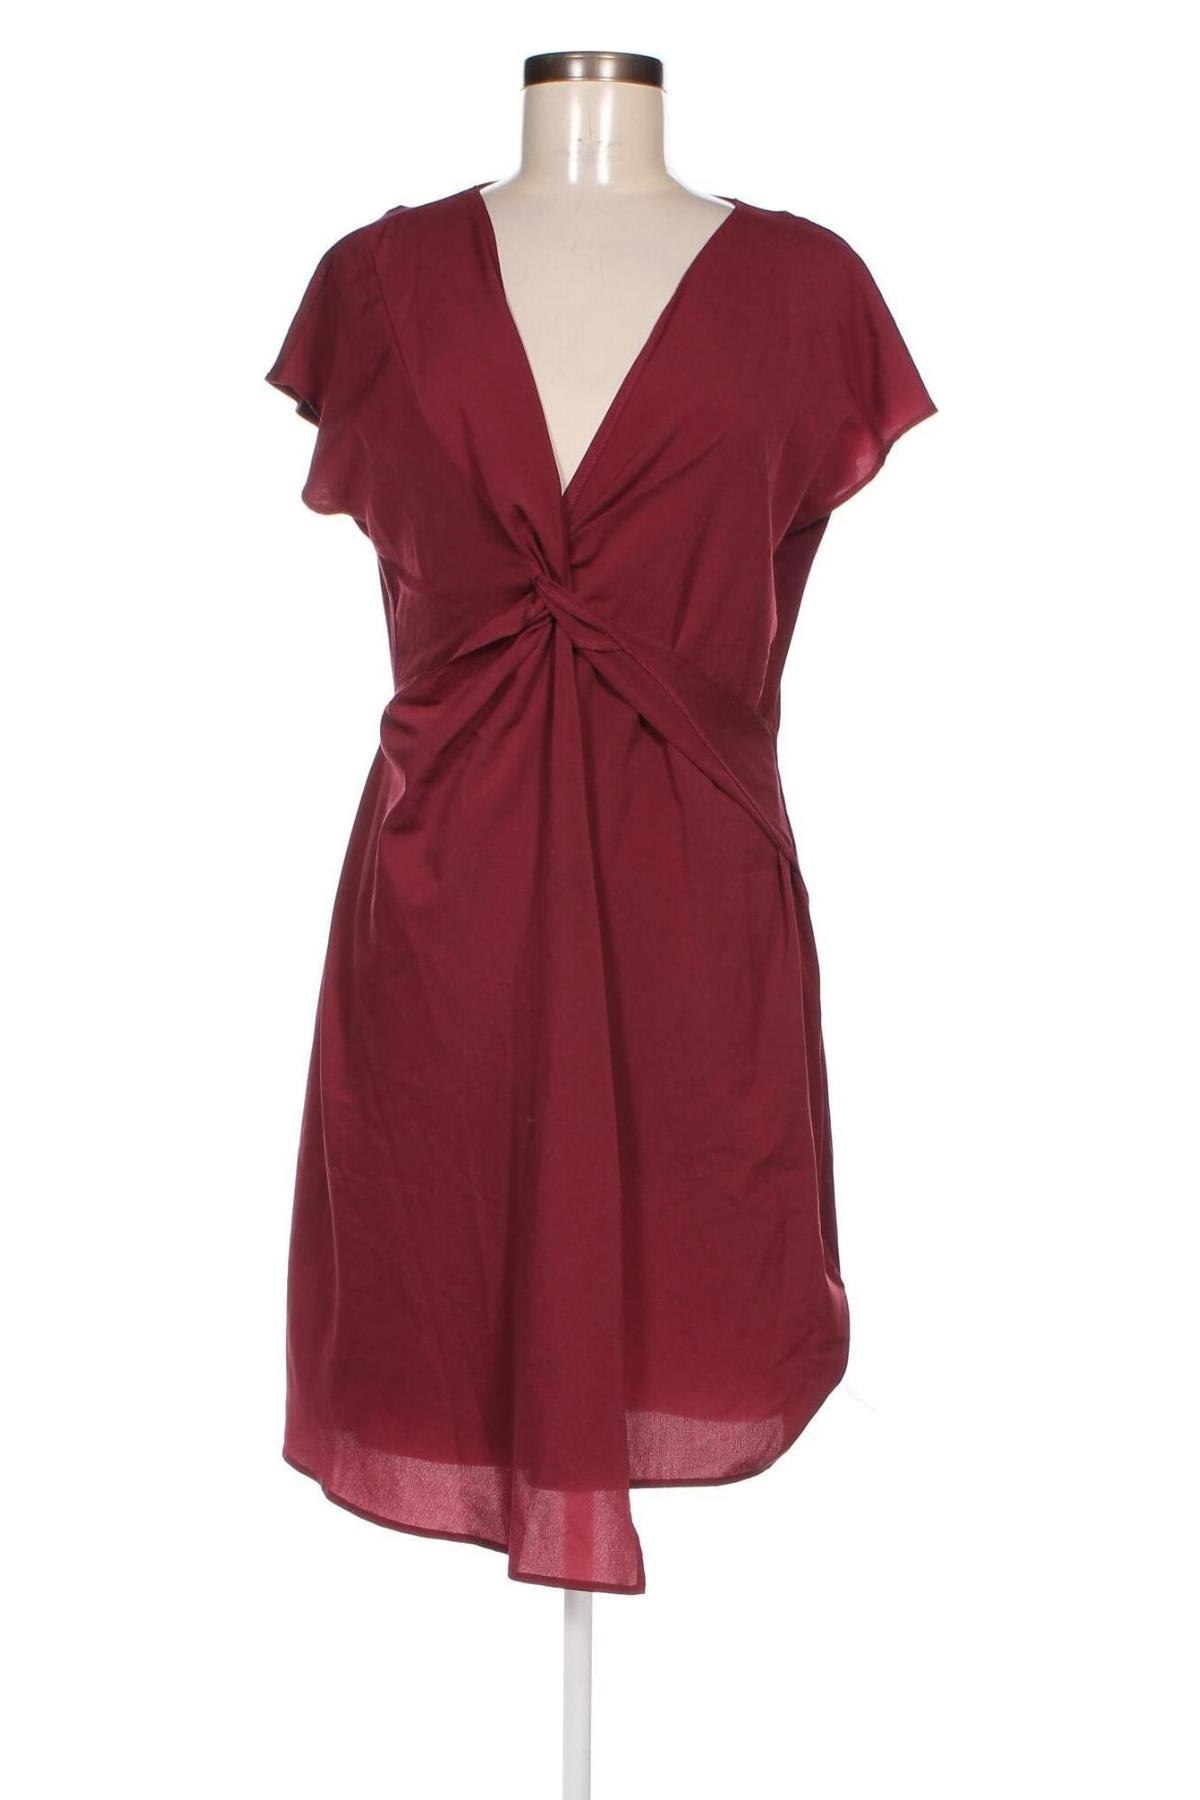 Kleid Guido Maria Kretschmer for About You, Größe M, Farbe Rot, Preis 11,13 €